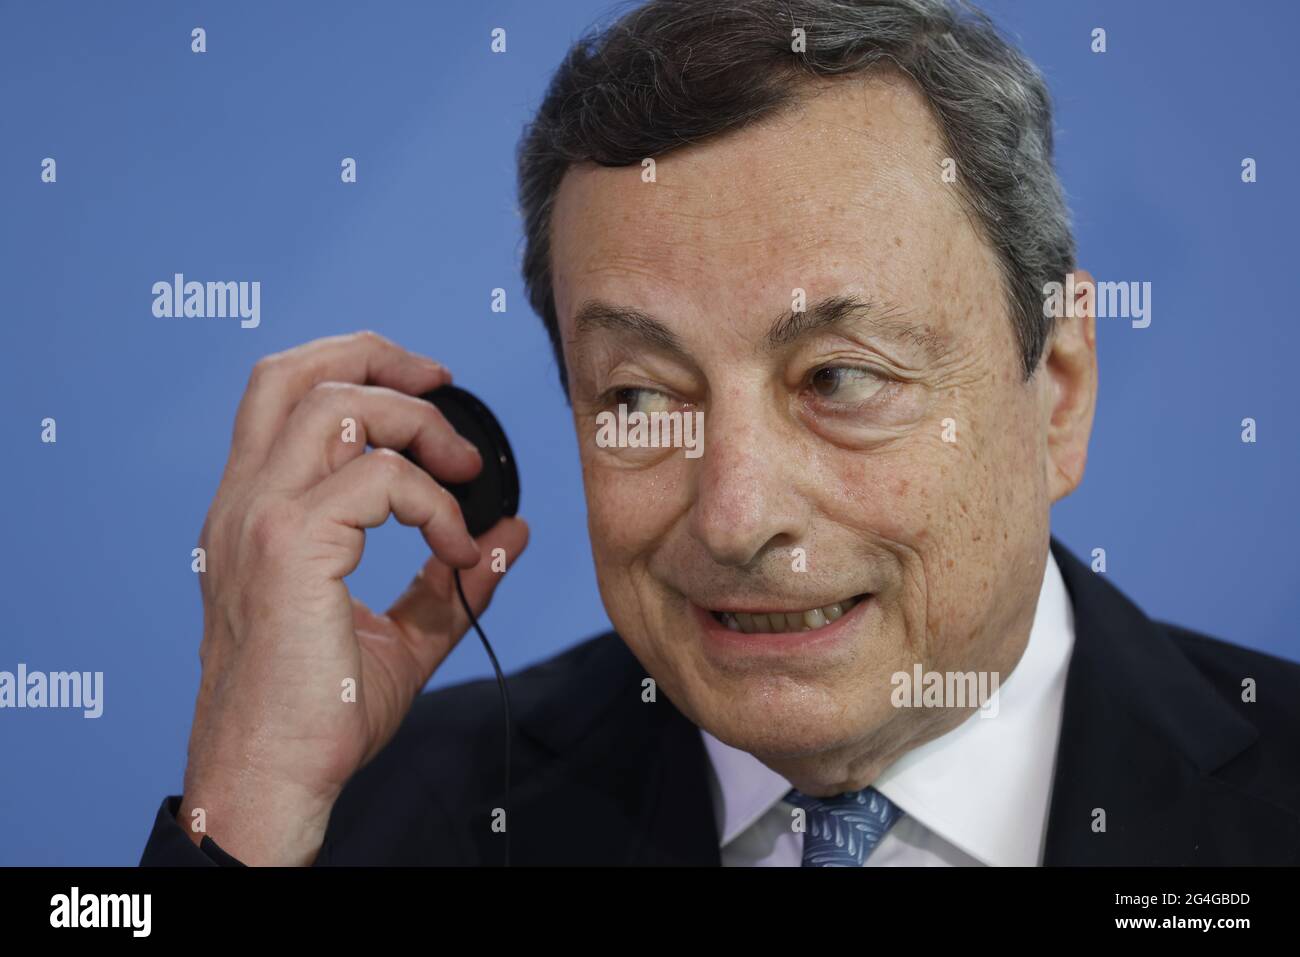 Berlin, Germany. 21st June, 2021. Mario Draghi, Prime Minister of Italy, holds a joint press conference with Chancellor Merkel at the Federal Chancellery. Draghi is in Berlin for his inaugural visit. Credit: Odd Andersen/AFP-Pool/dpa/Alamy Live News Stock Photo